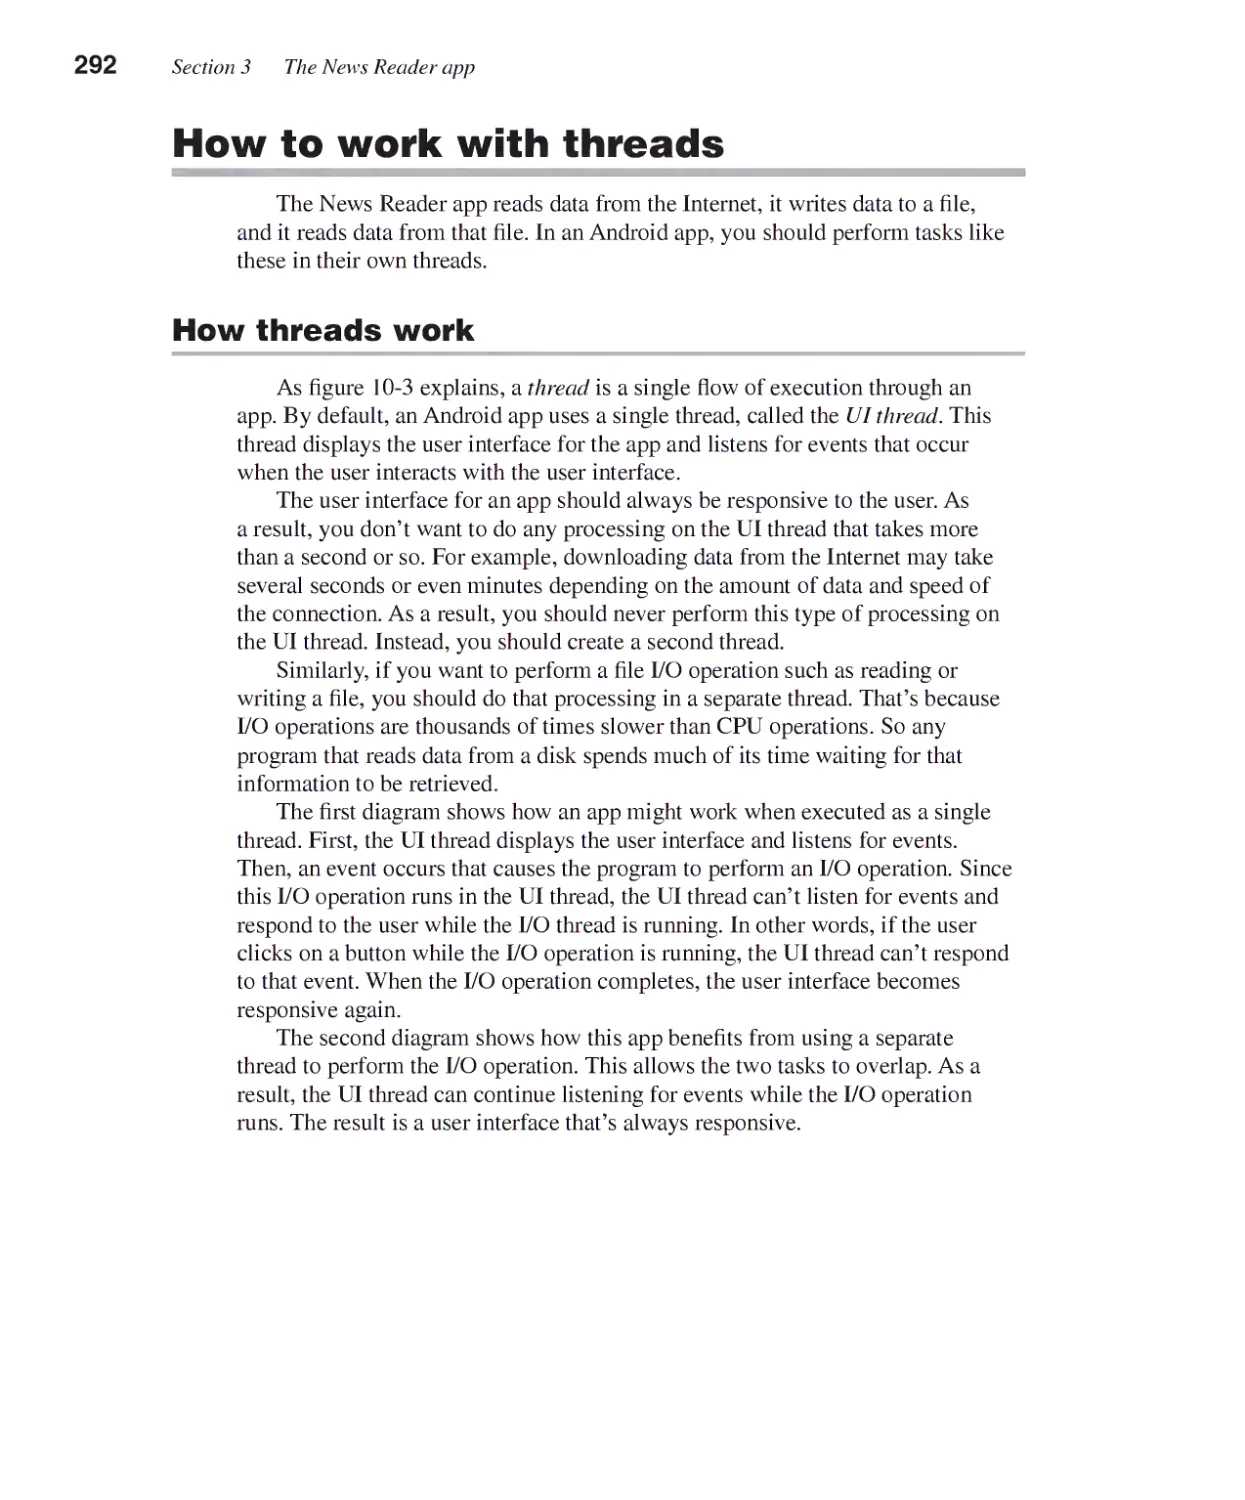 How to Work with Threads